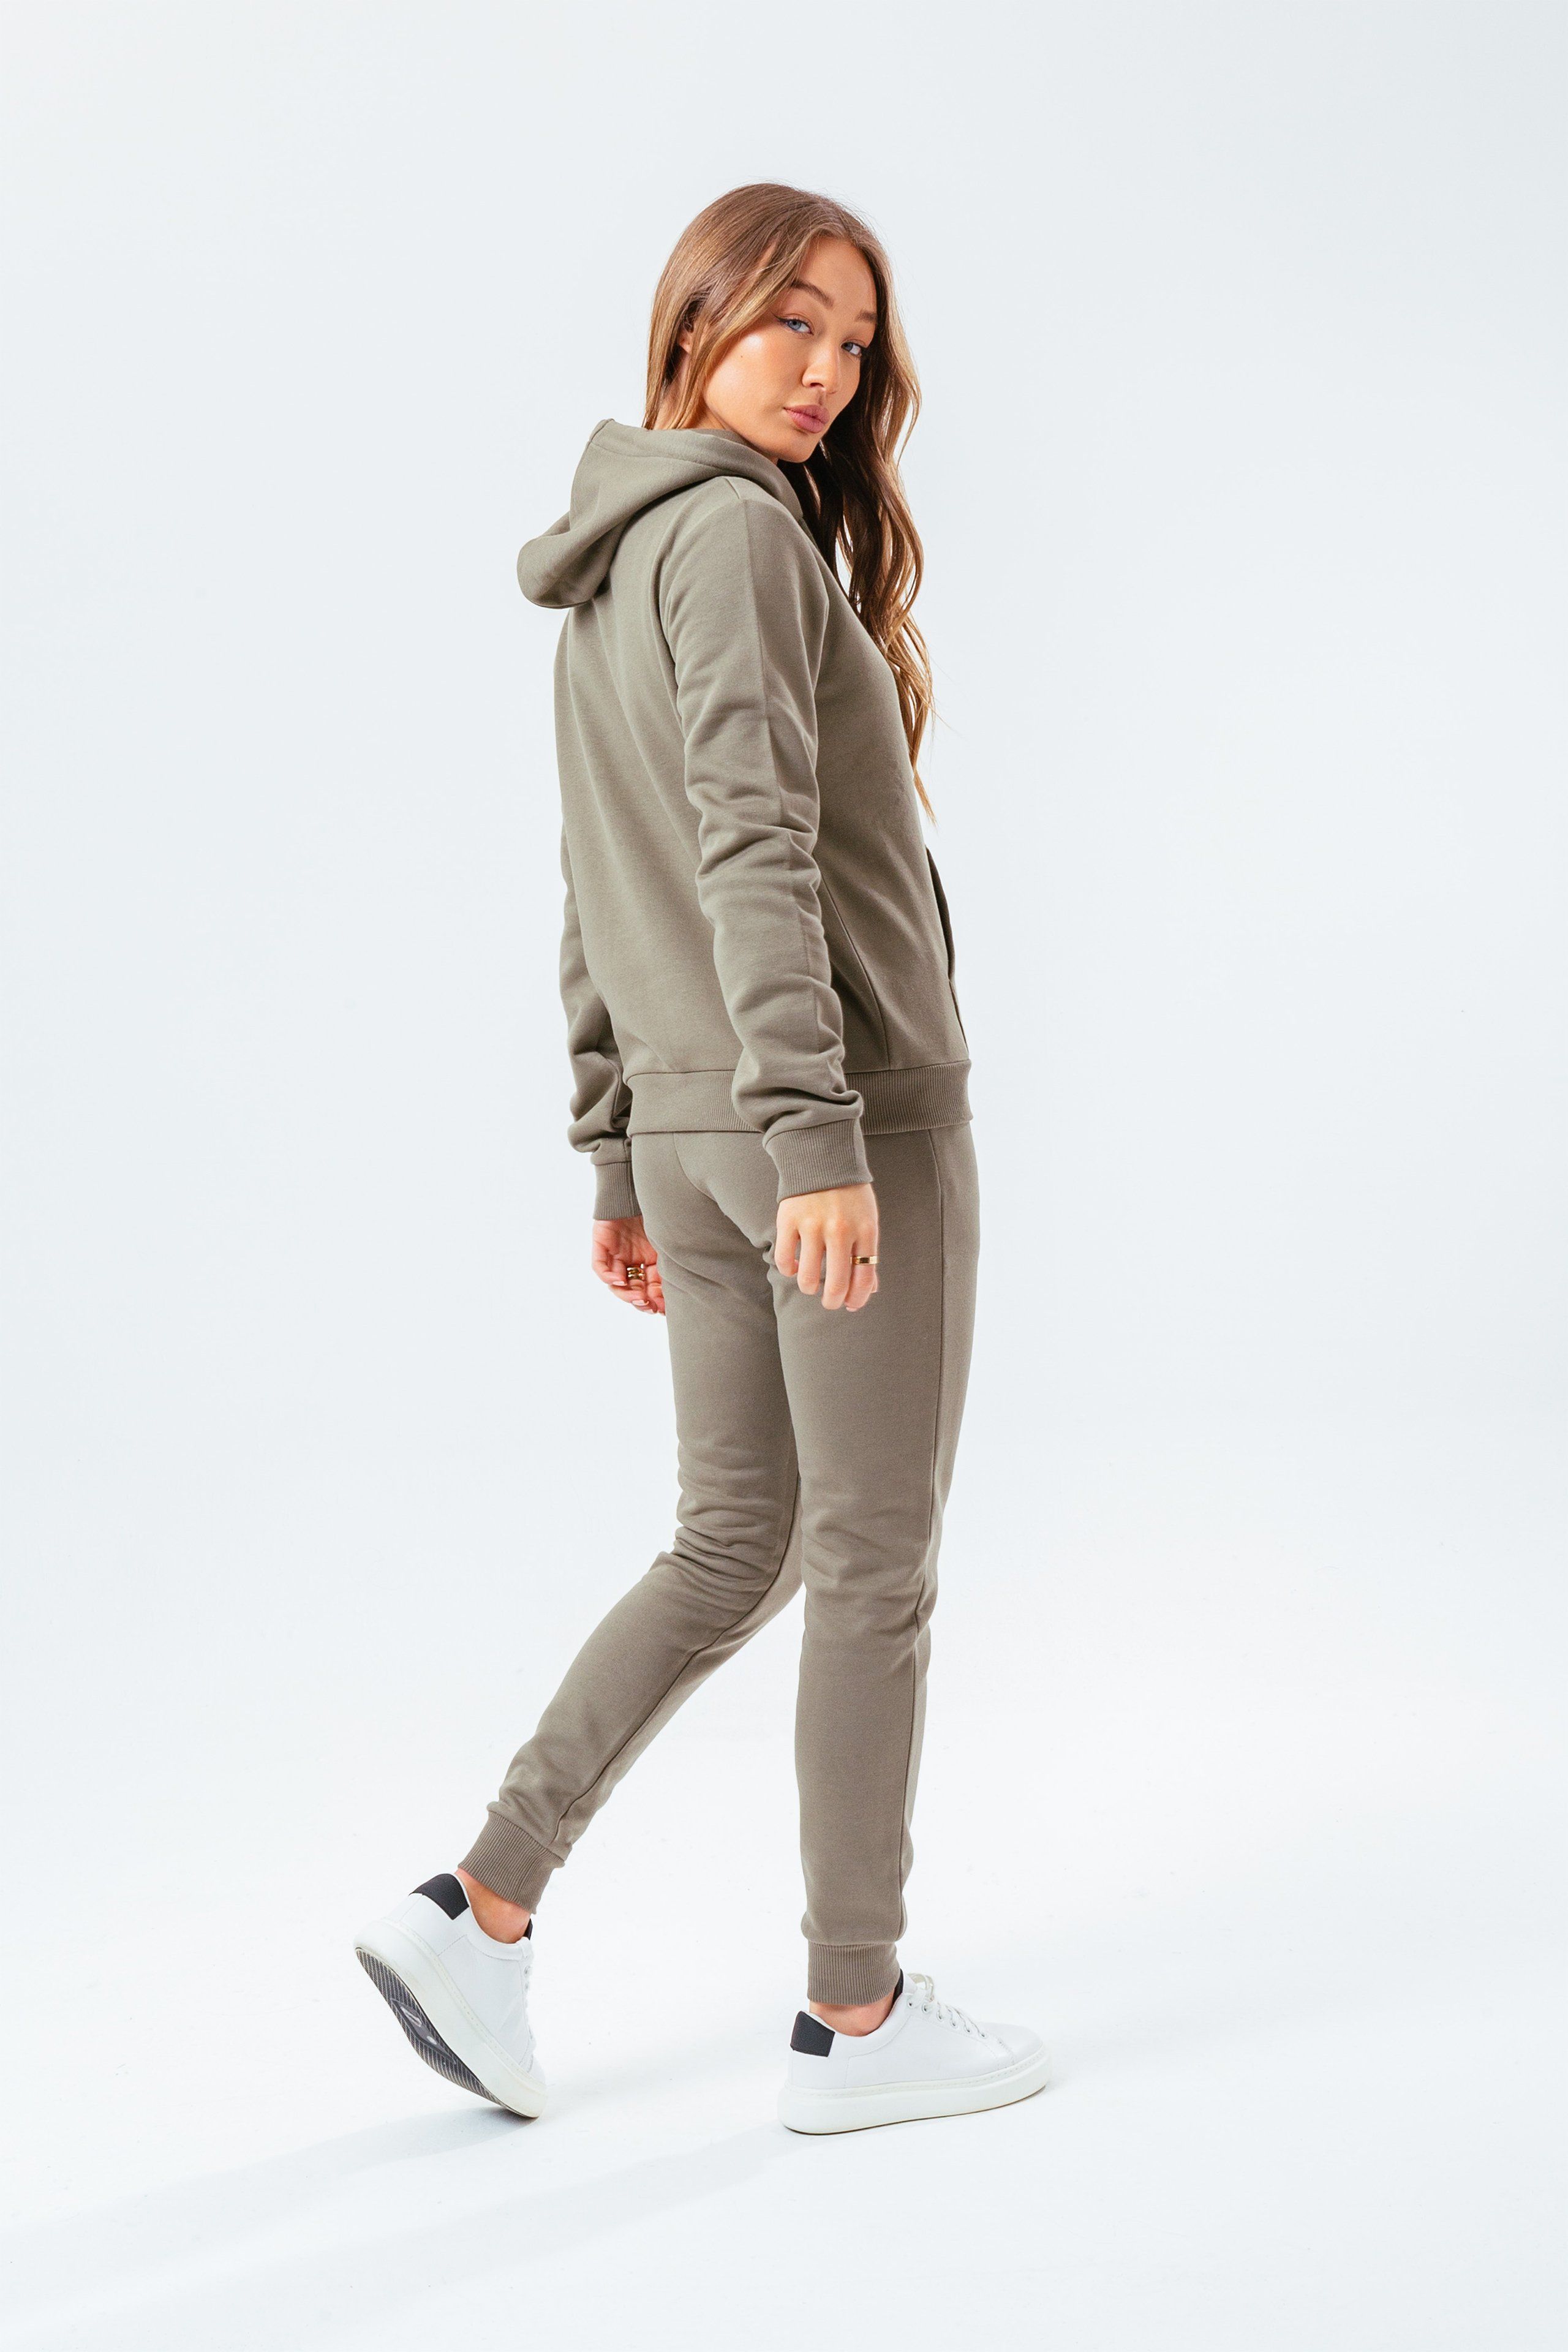 The hoodie staple you need every season. The HYPE. Women's Moss Signature Hoodie. With a fixed hood, fitted cuffs, elasticated waistband and kangaroo pocket. Designed in a moss green 80% cotton and 20% polyester fabric base for the ultimate comfort and breathable space. Wear with the matching joggers to complete your next loungewear look. Machine Washable